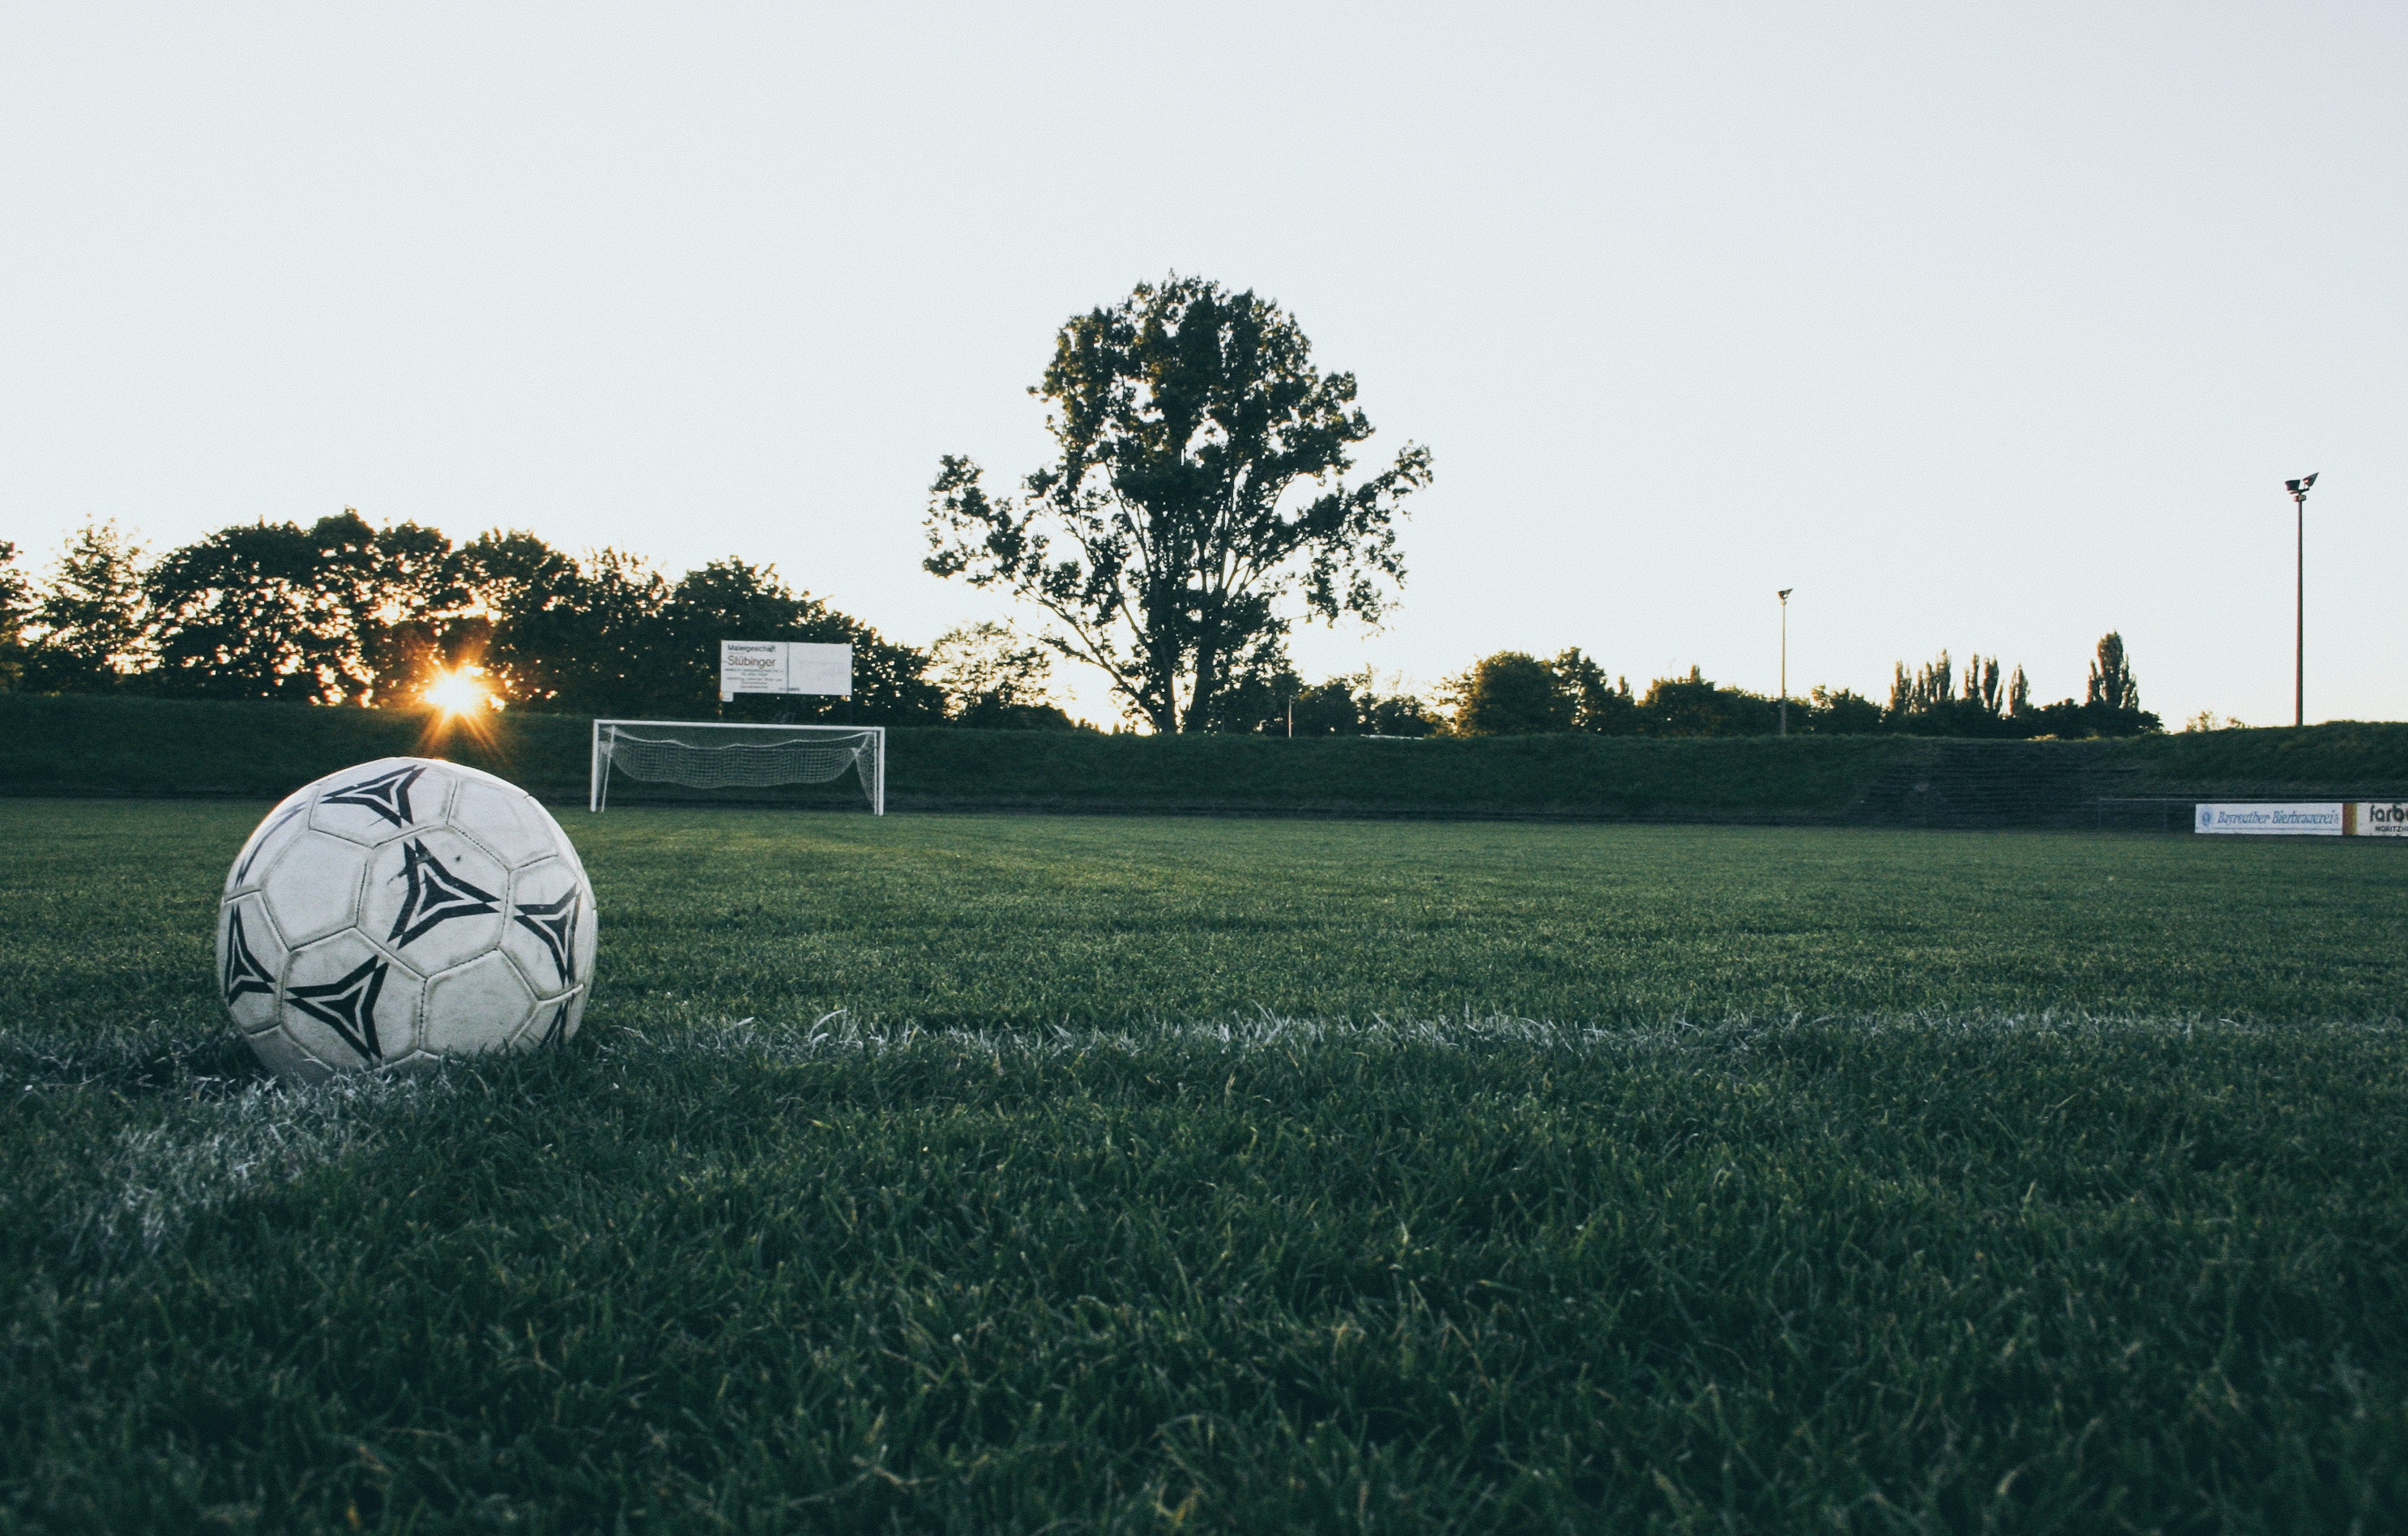 Black and white soccer ball on green grass land during daytime photo